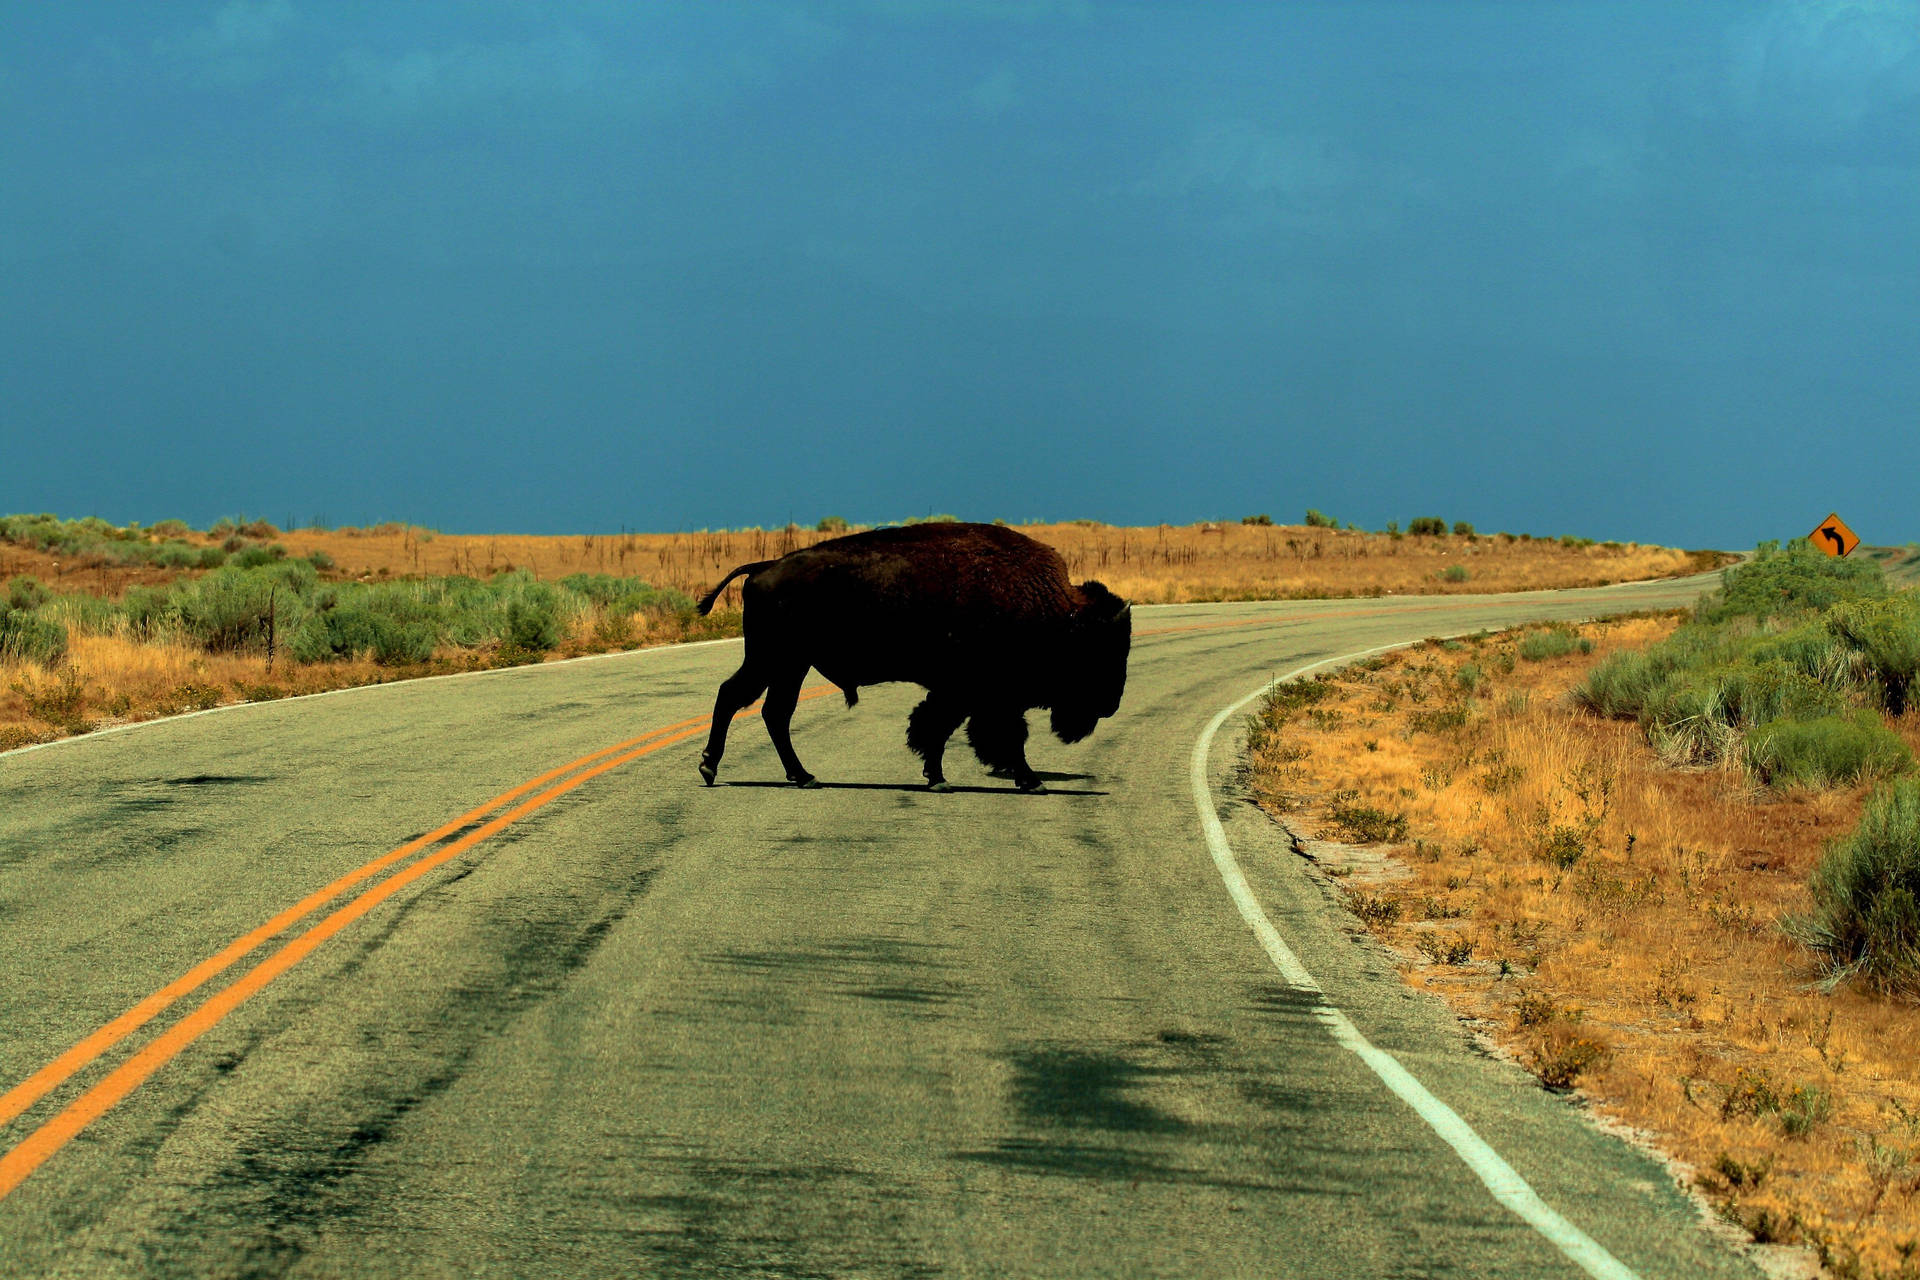 Buffalopå Väg (for A Computer Or Mobile Wallpaper Featuring An Image Of Buffalo On A Road) Wallpaper